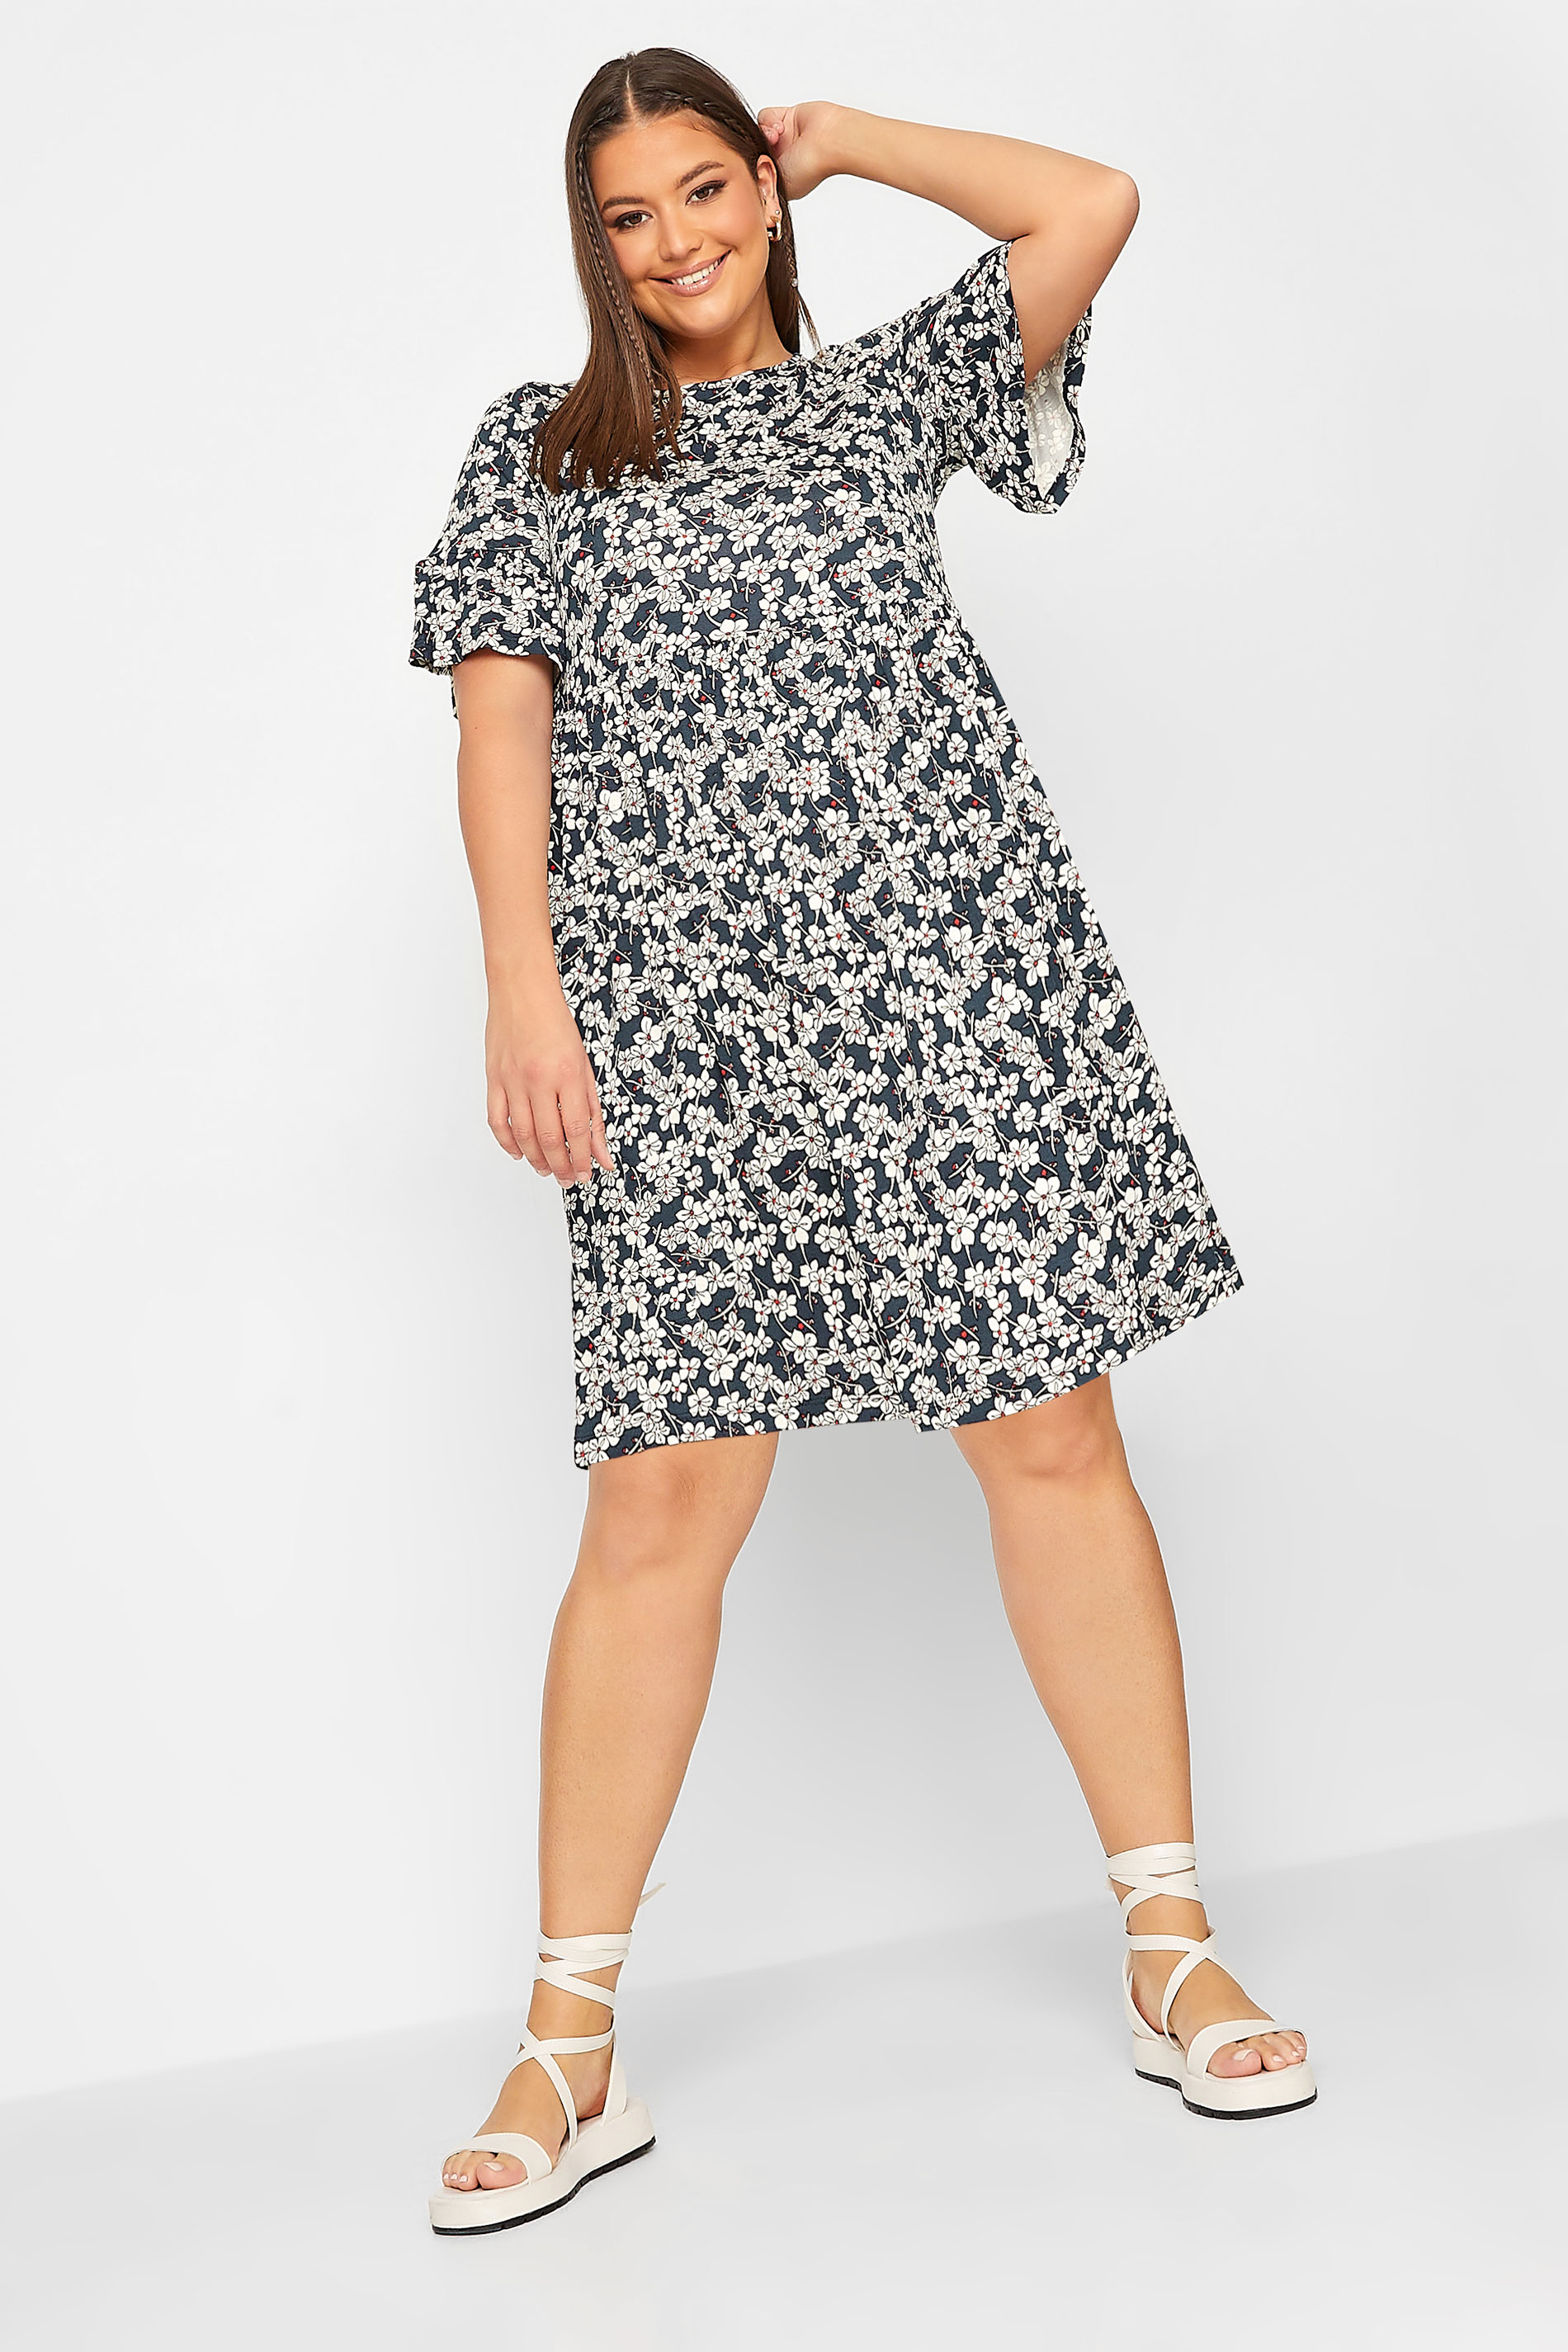 YOURS Curve Plus Size Navy Blue Ditsy Floral Print Smock Tunic Dress | Yours Clothing  2